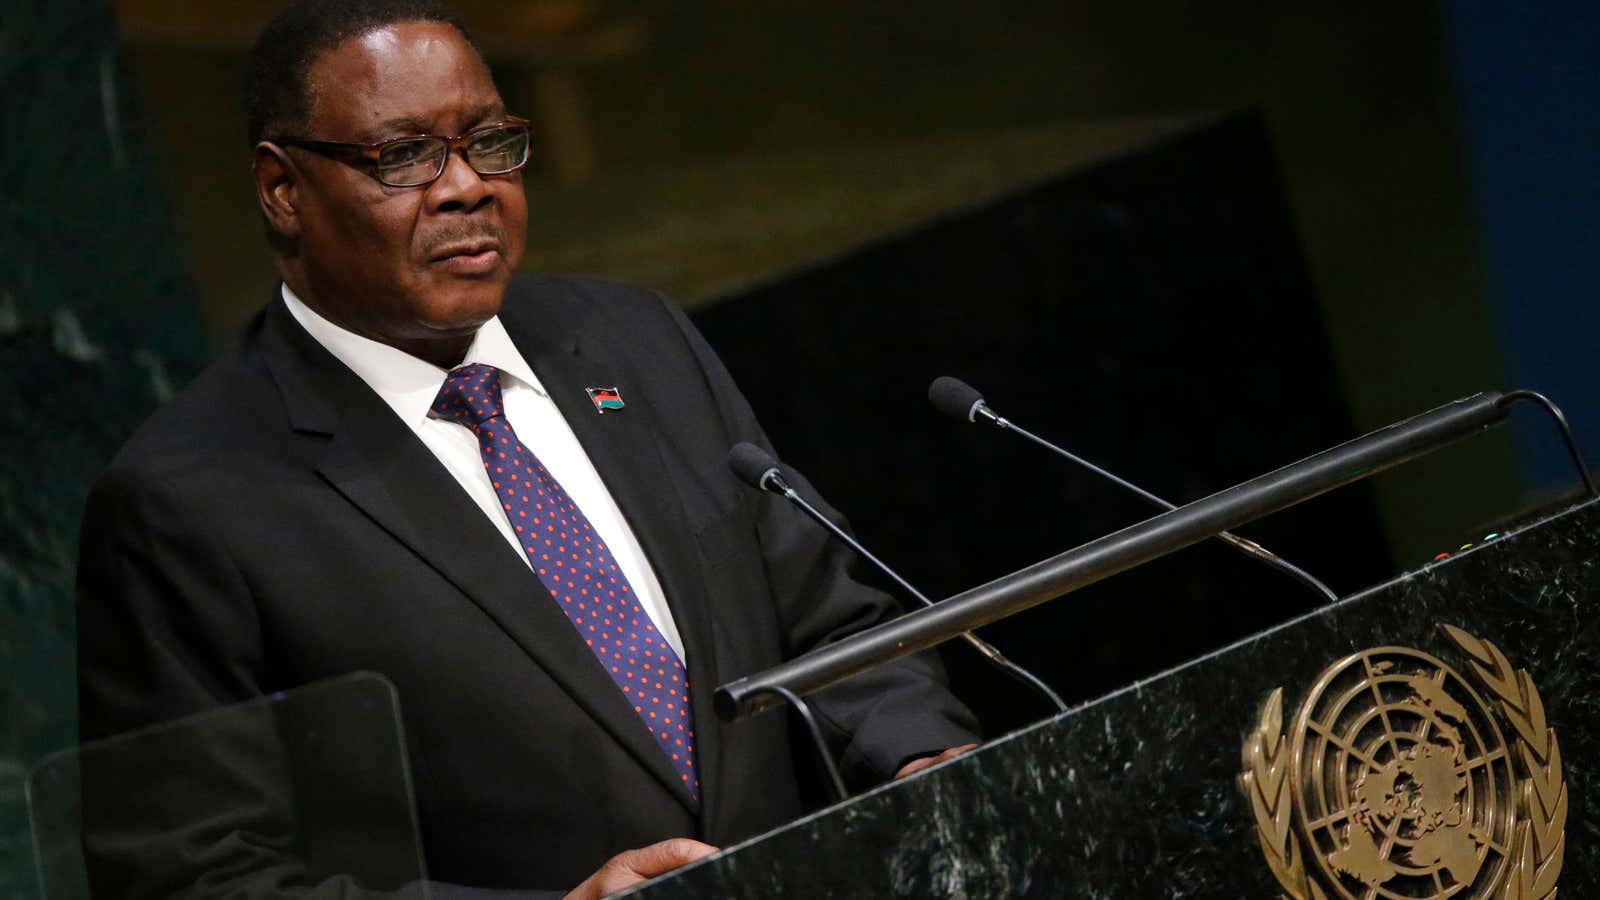 Mutharika was last seen at the United Nations General Assembly.